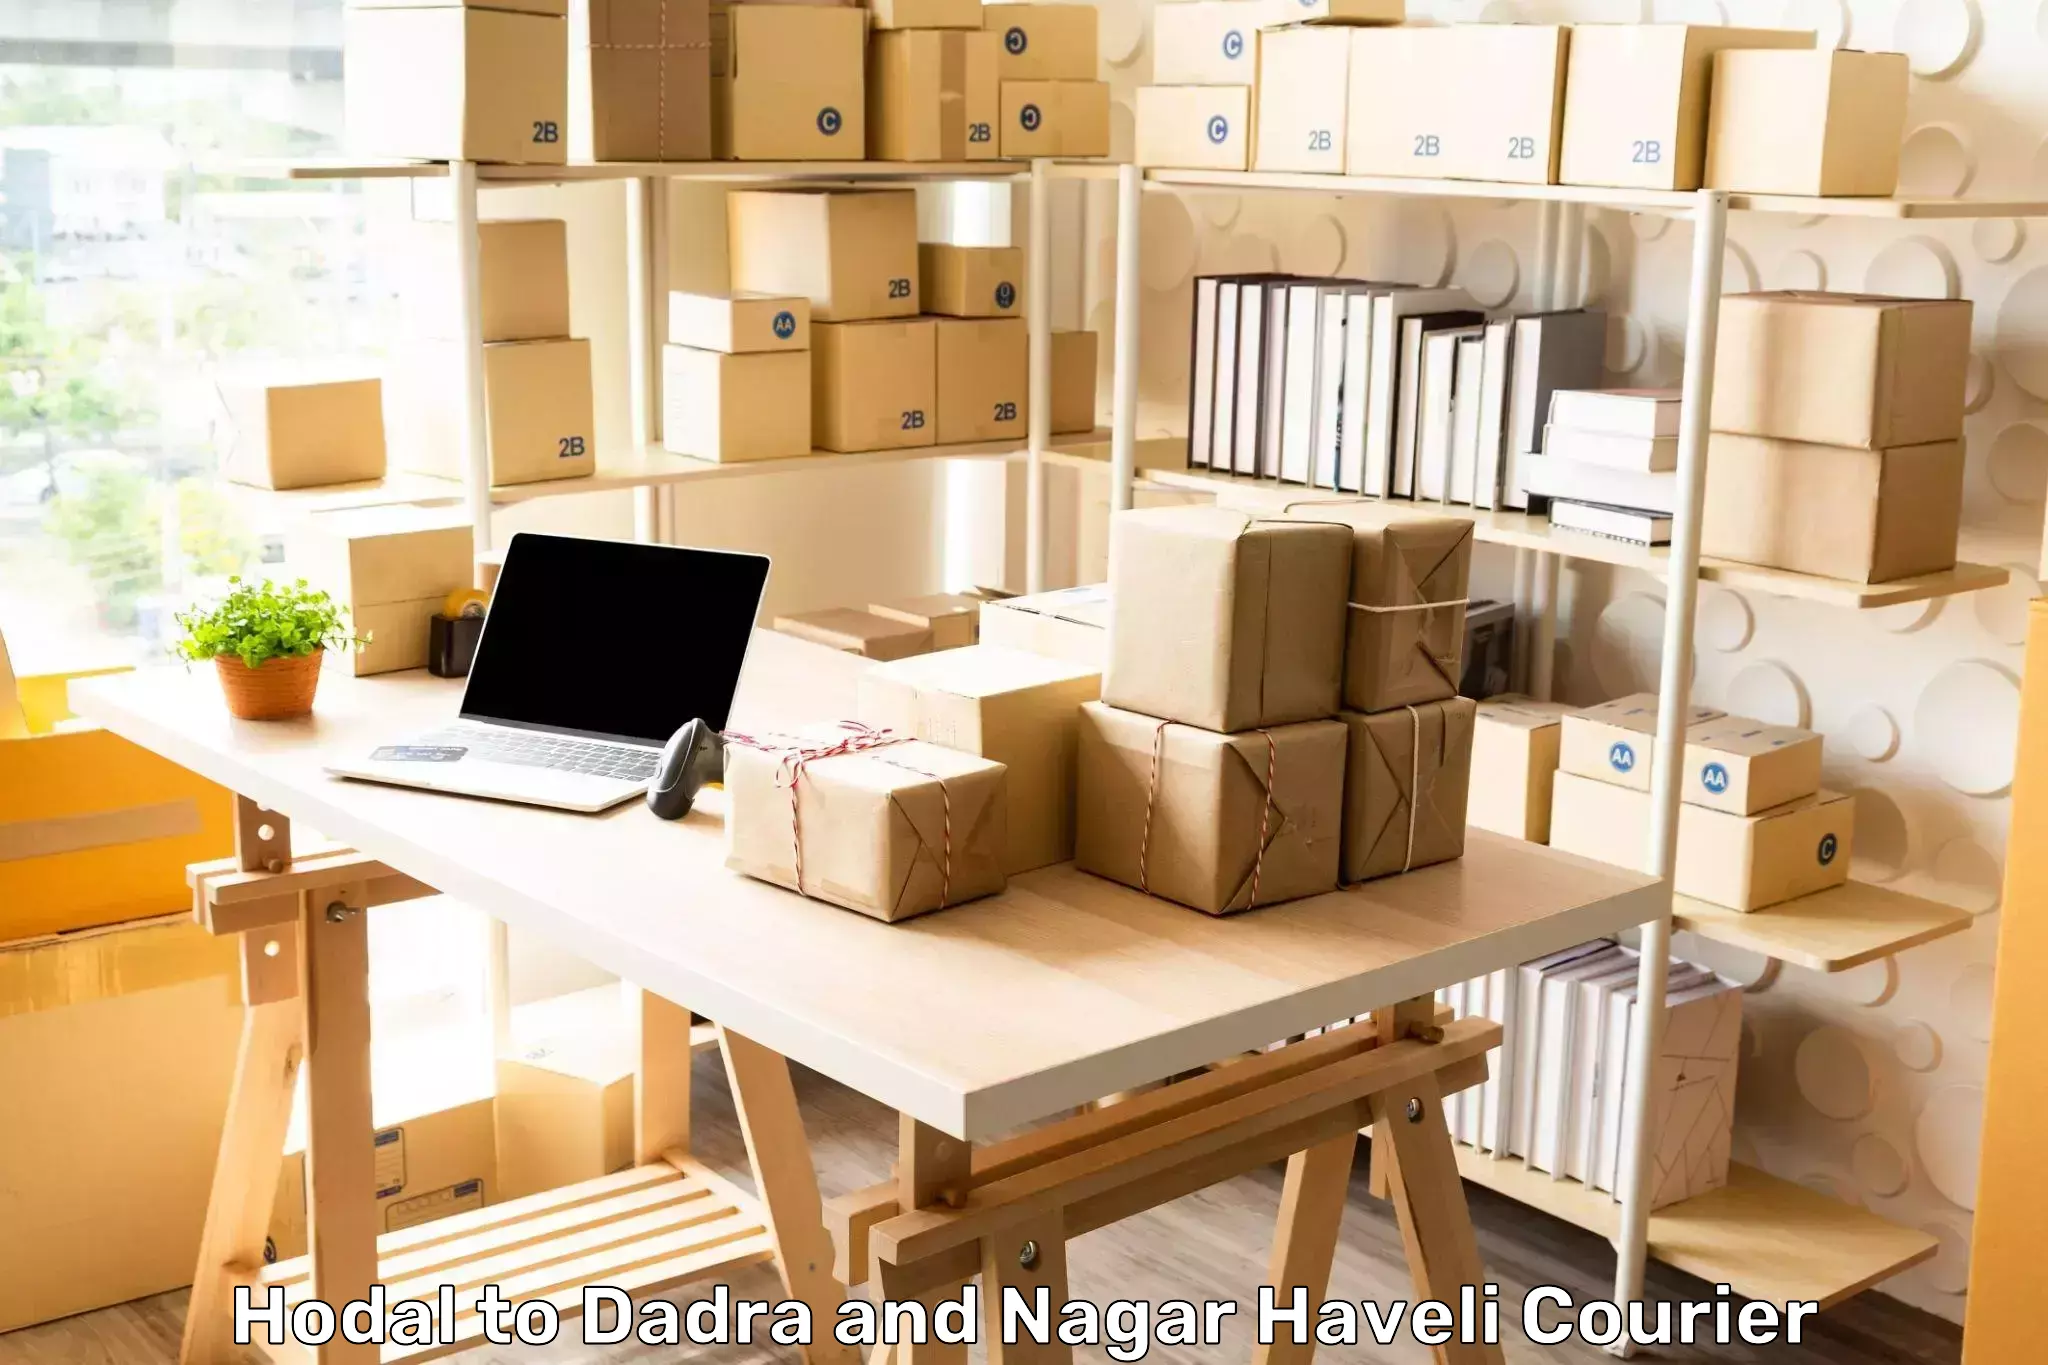 Professional courier services Hodal to Dadra and Nagar Haveli